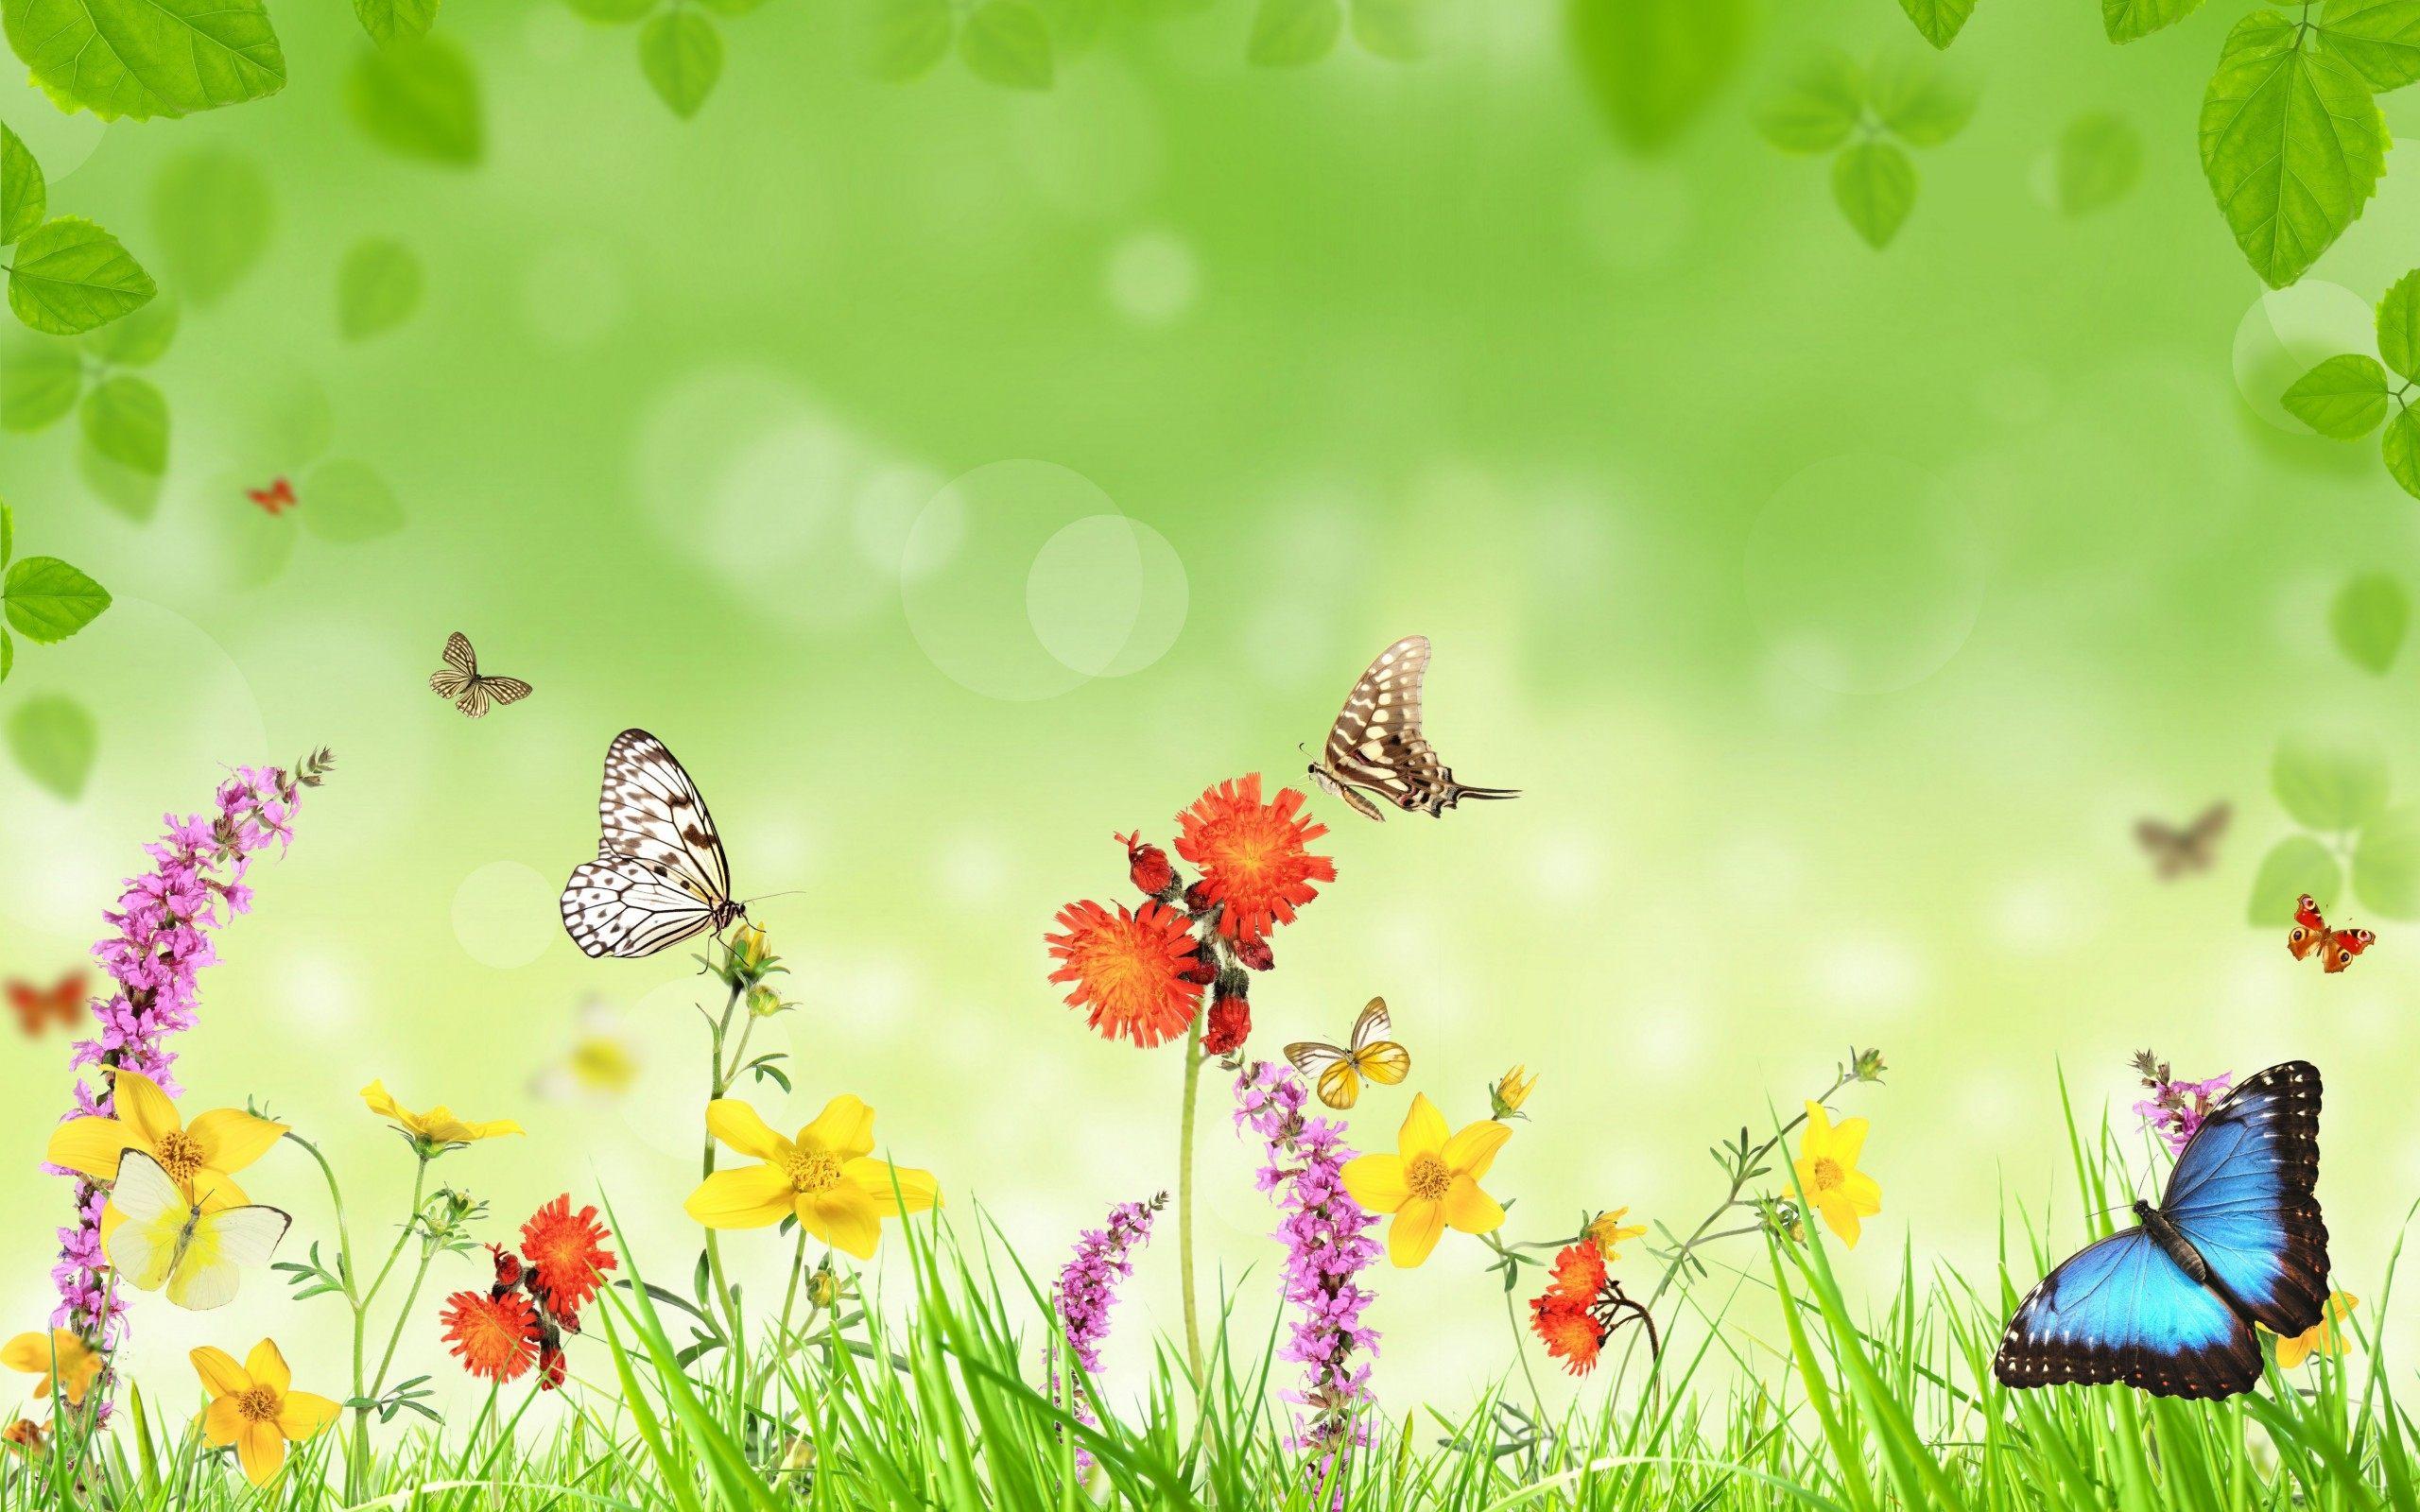 For mobile wallpaper, 300x299 CA, Butterfly and daisies